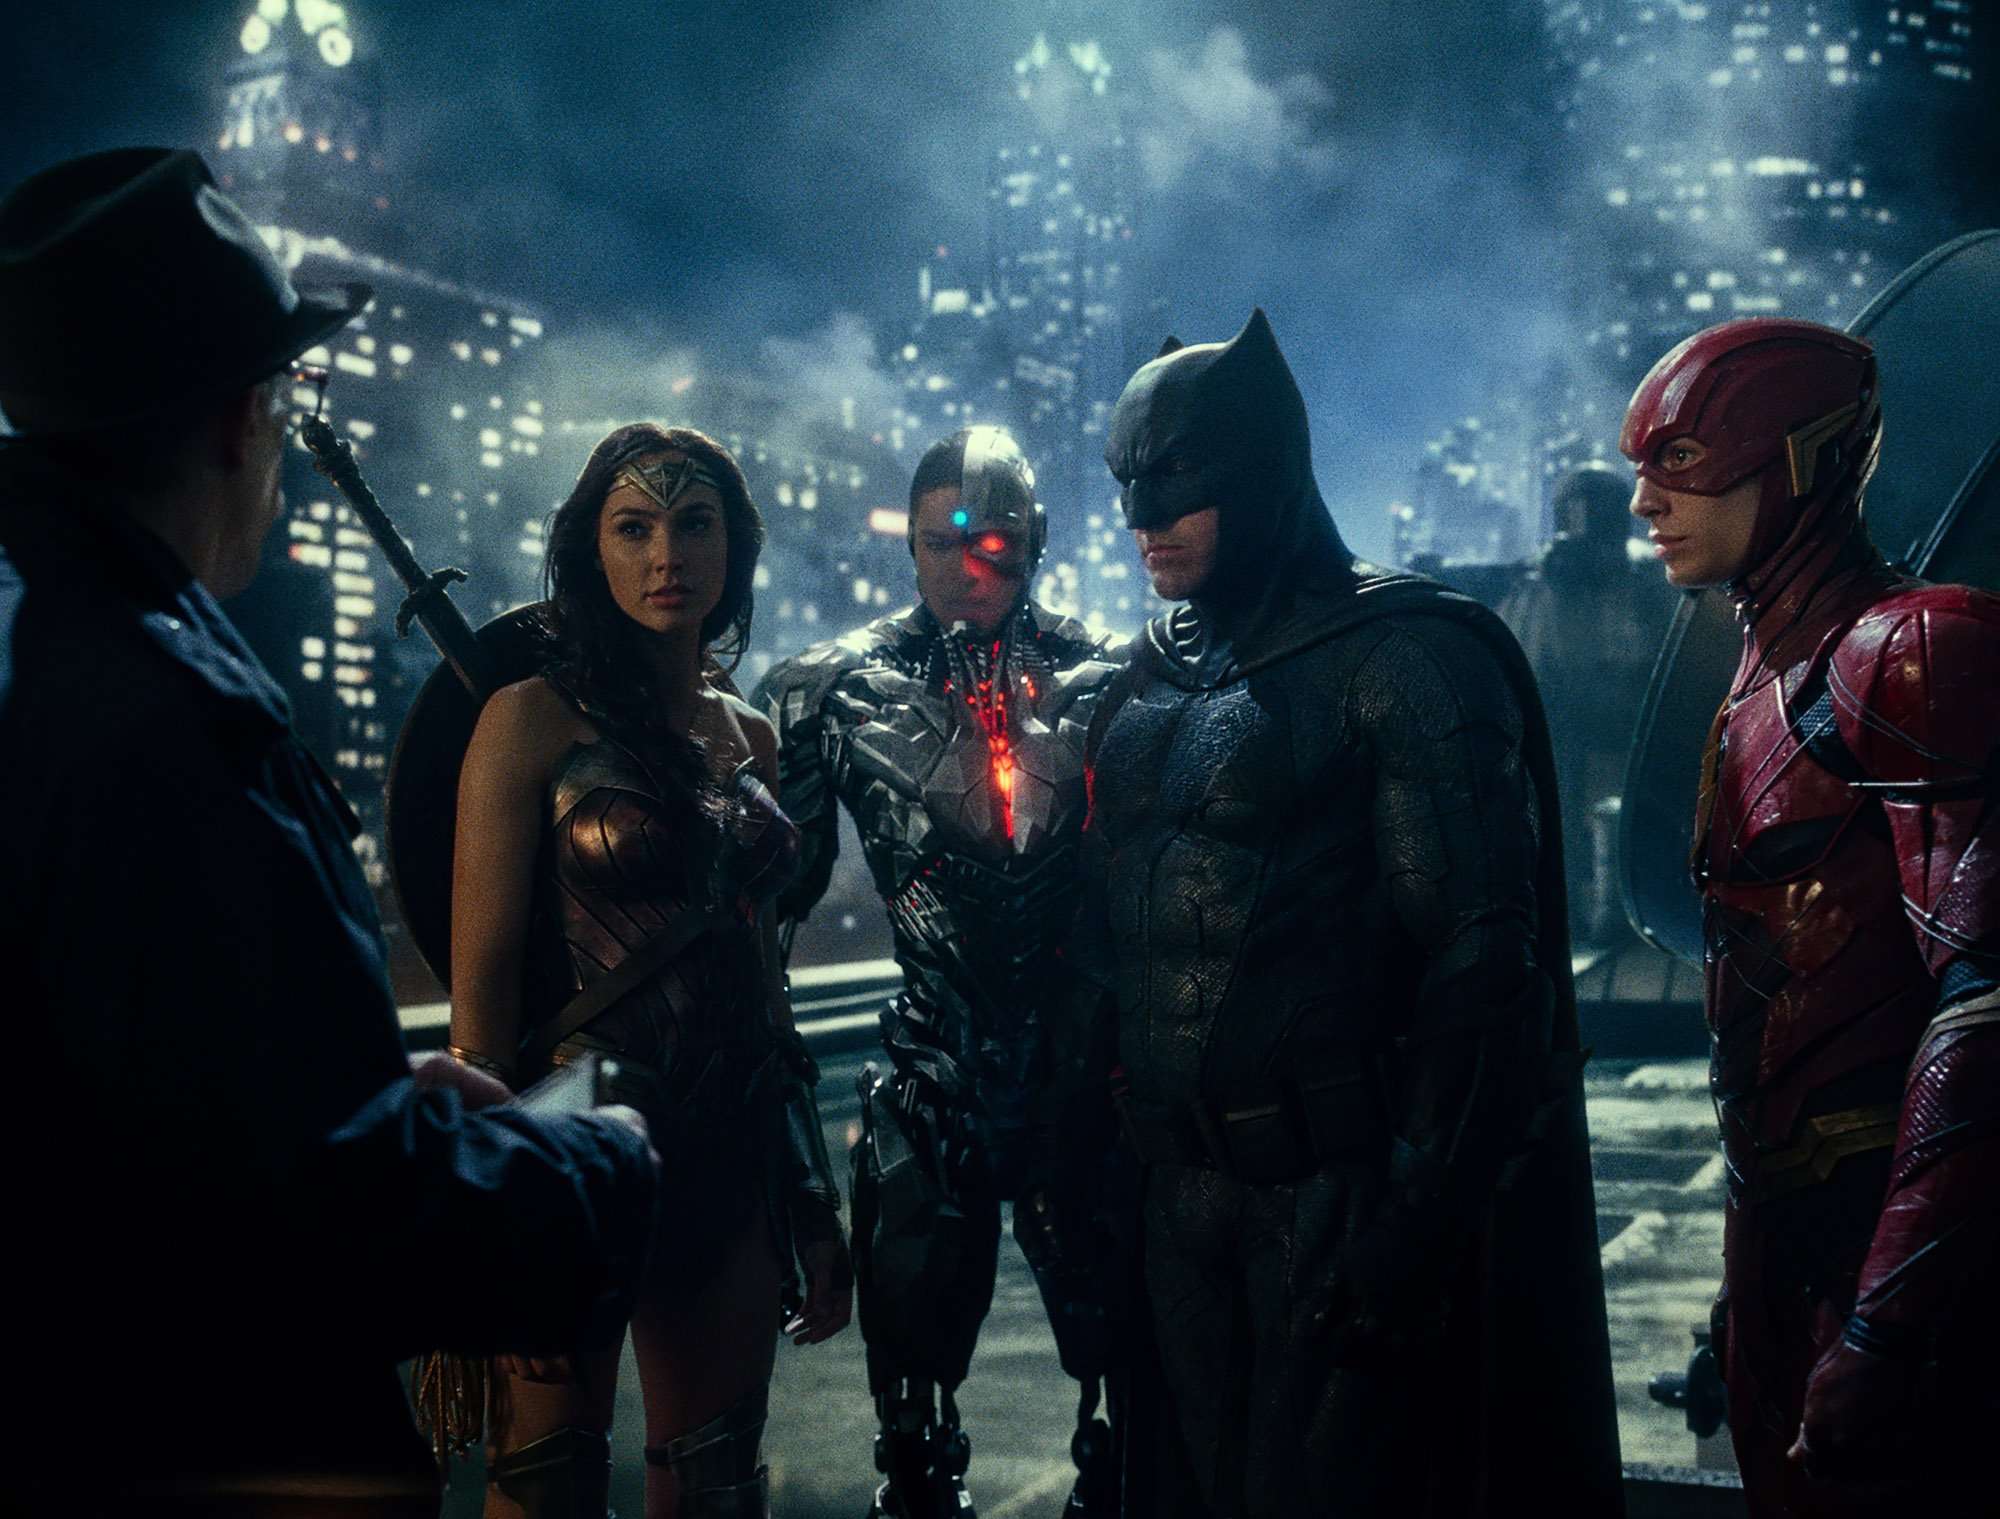 image for ‘Justice League’ Ends Box Office Run as Lowest-Grossing DCEU Movie